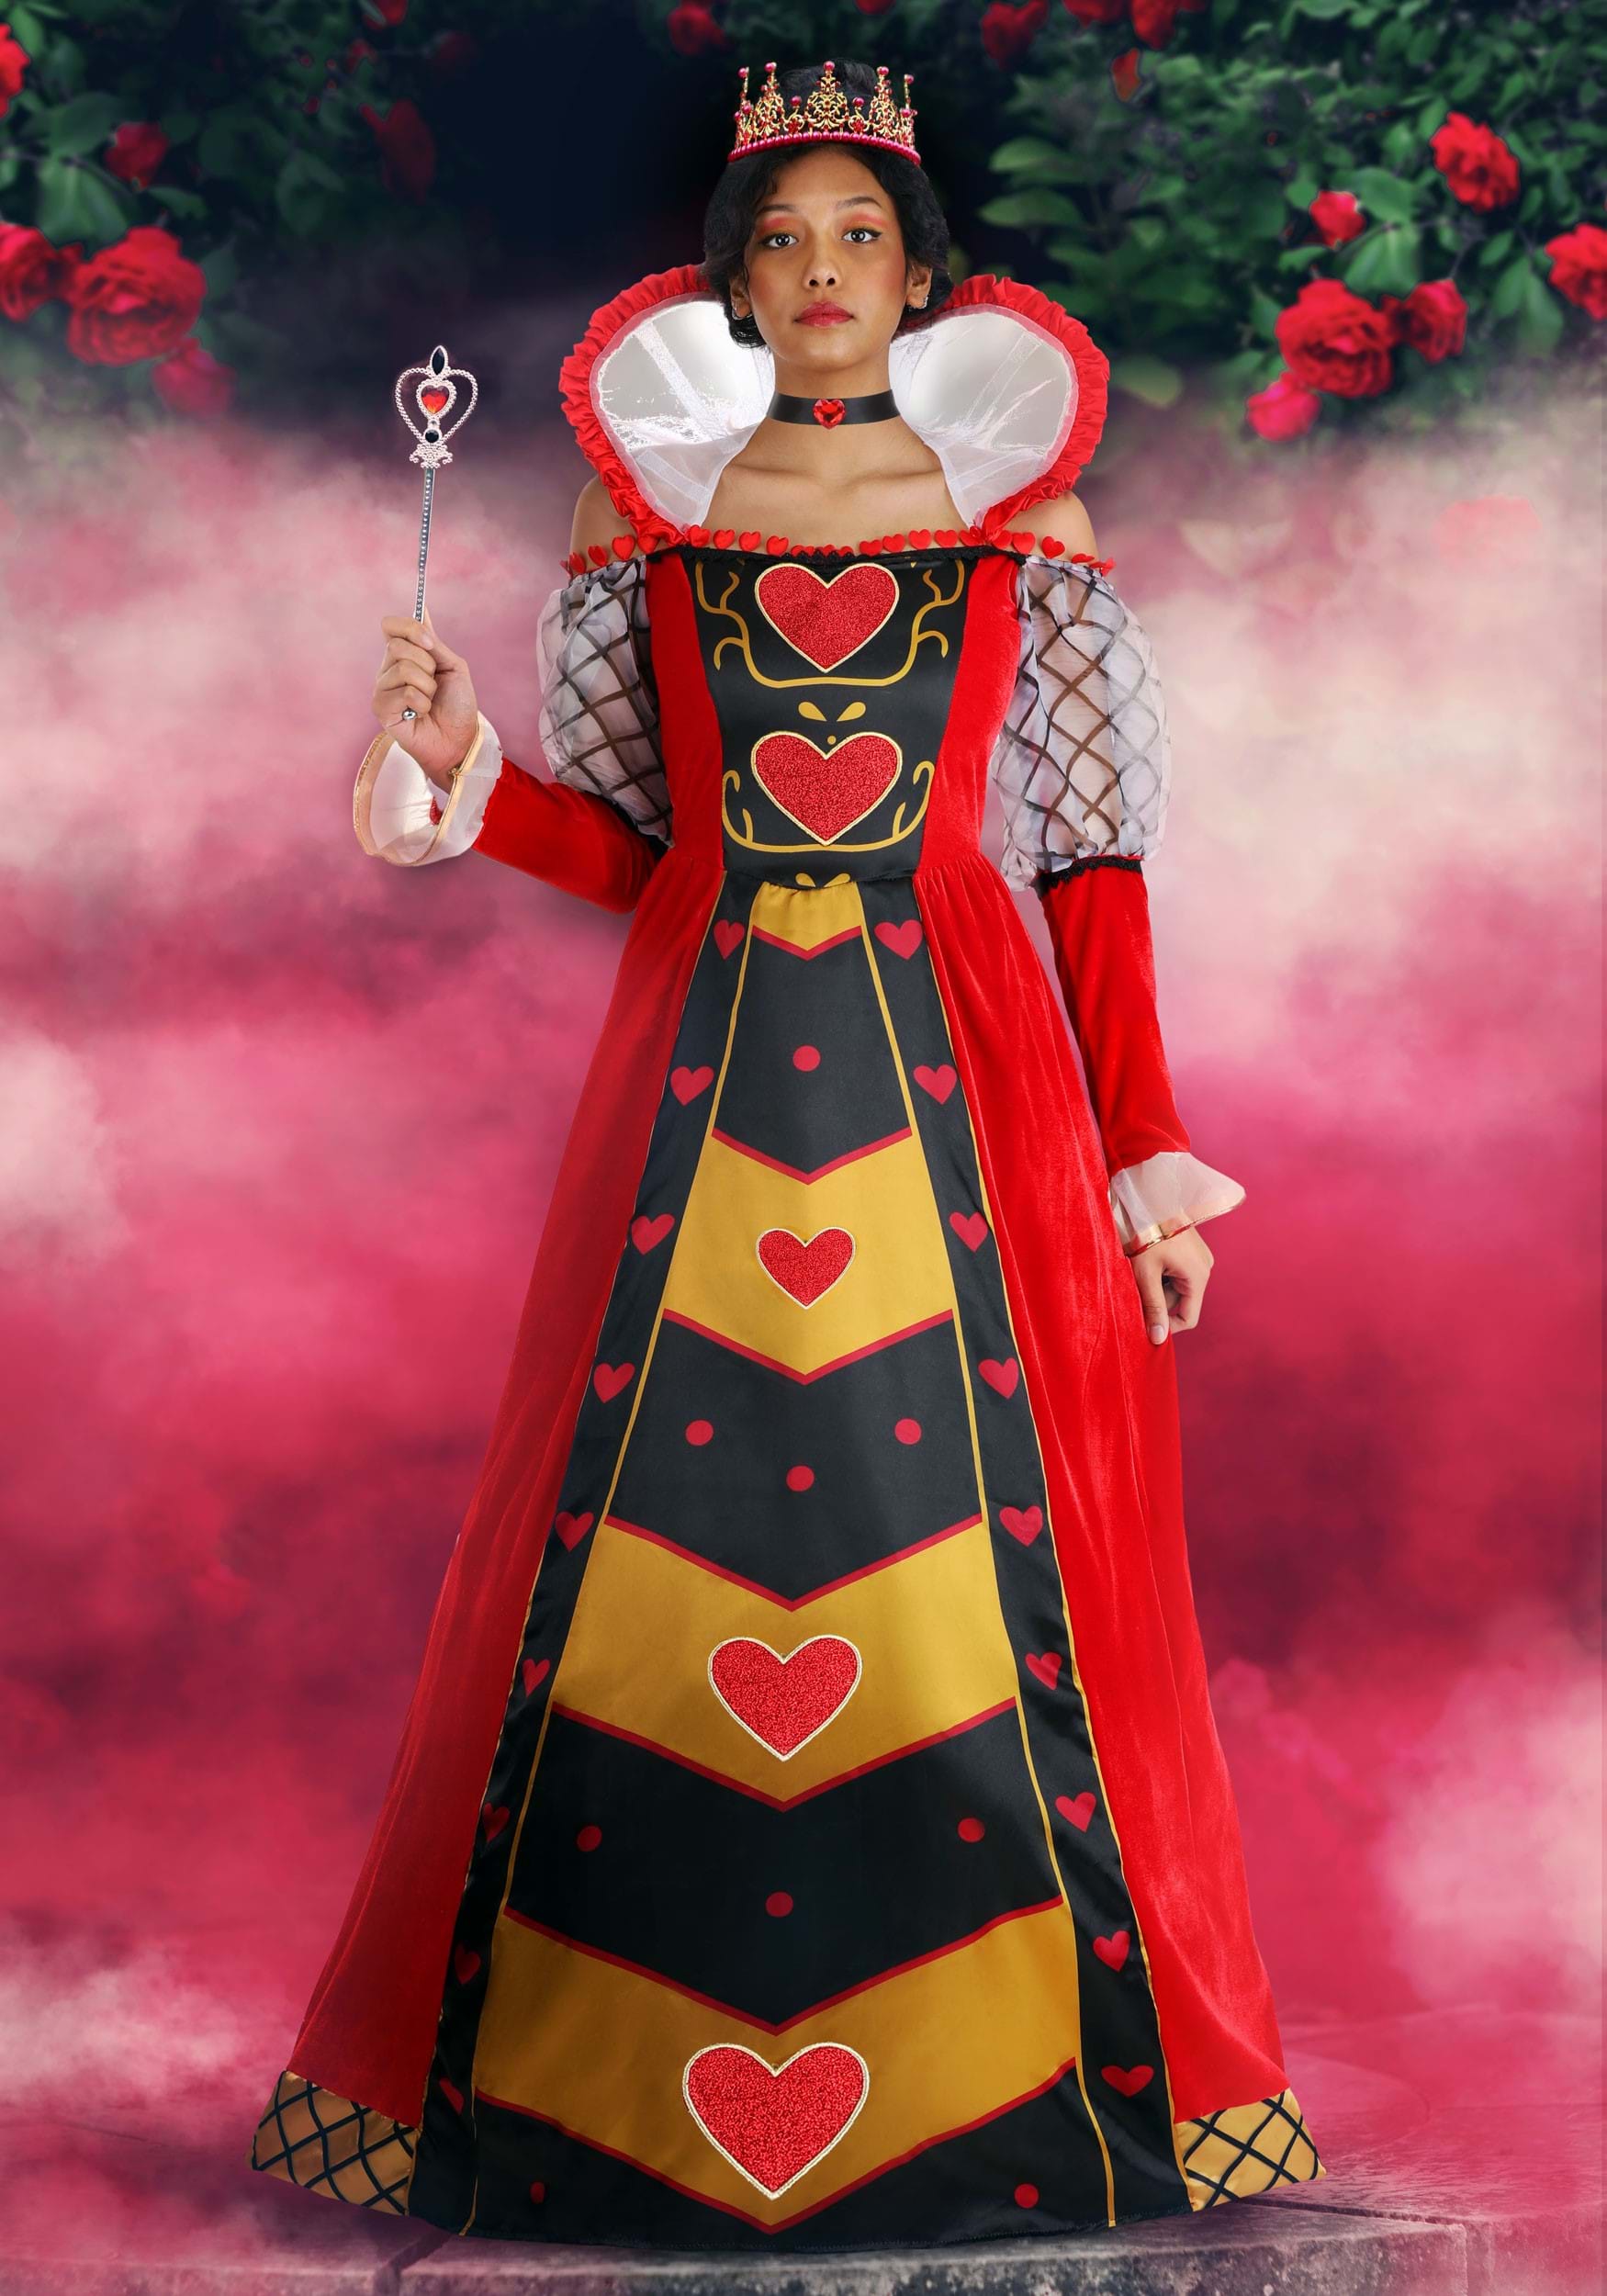 Cheap and Easy Queen of Hearts Costume DIY - Cuckoo4Design